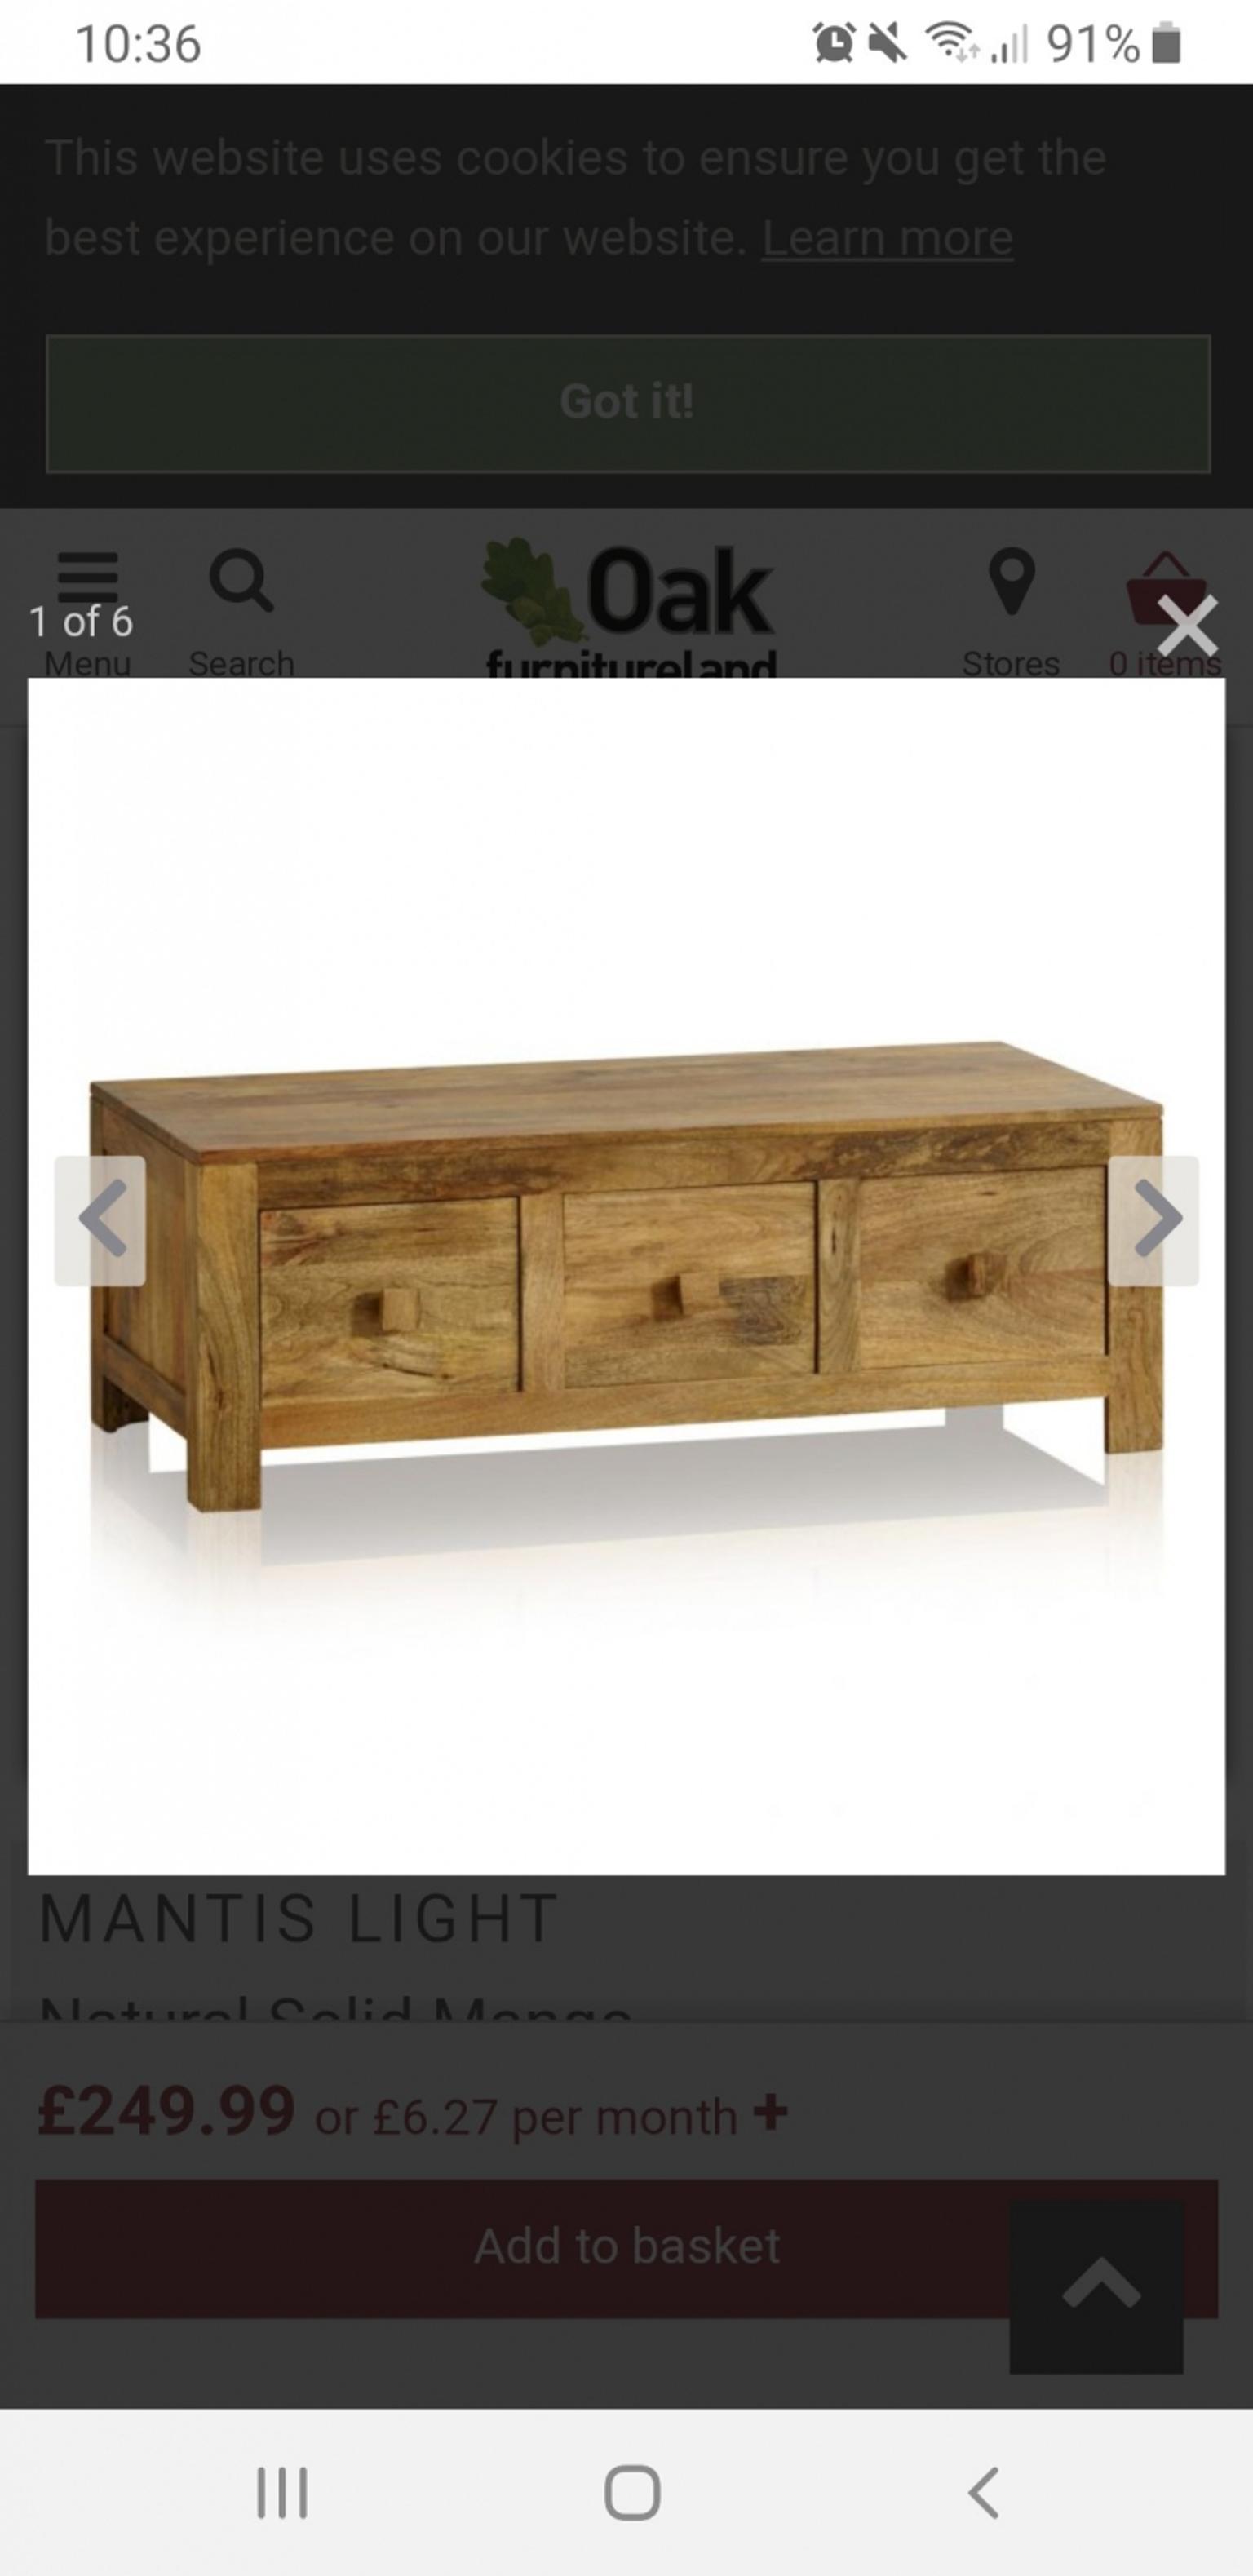 Mantis Light Mango Wood Coffee Table In, Mantis Light Natural Solid Mango Lamp Table Combination